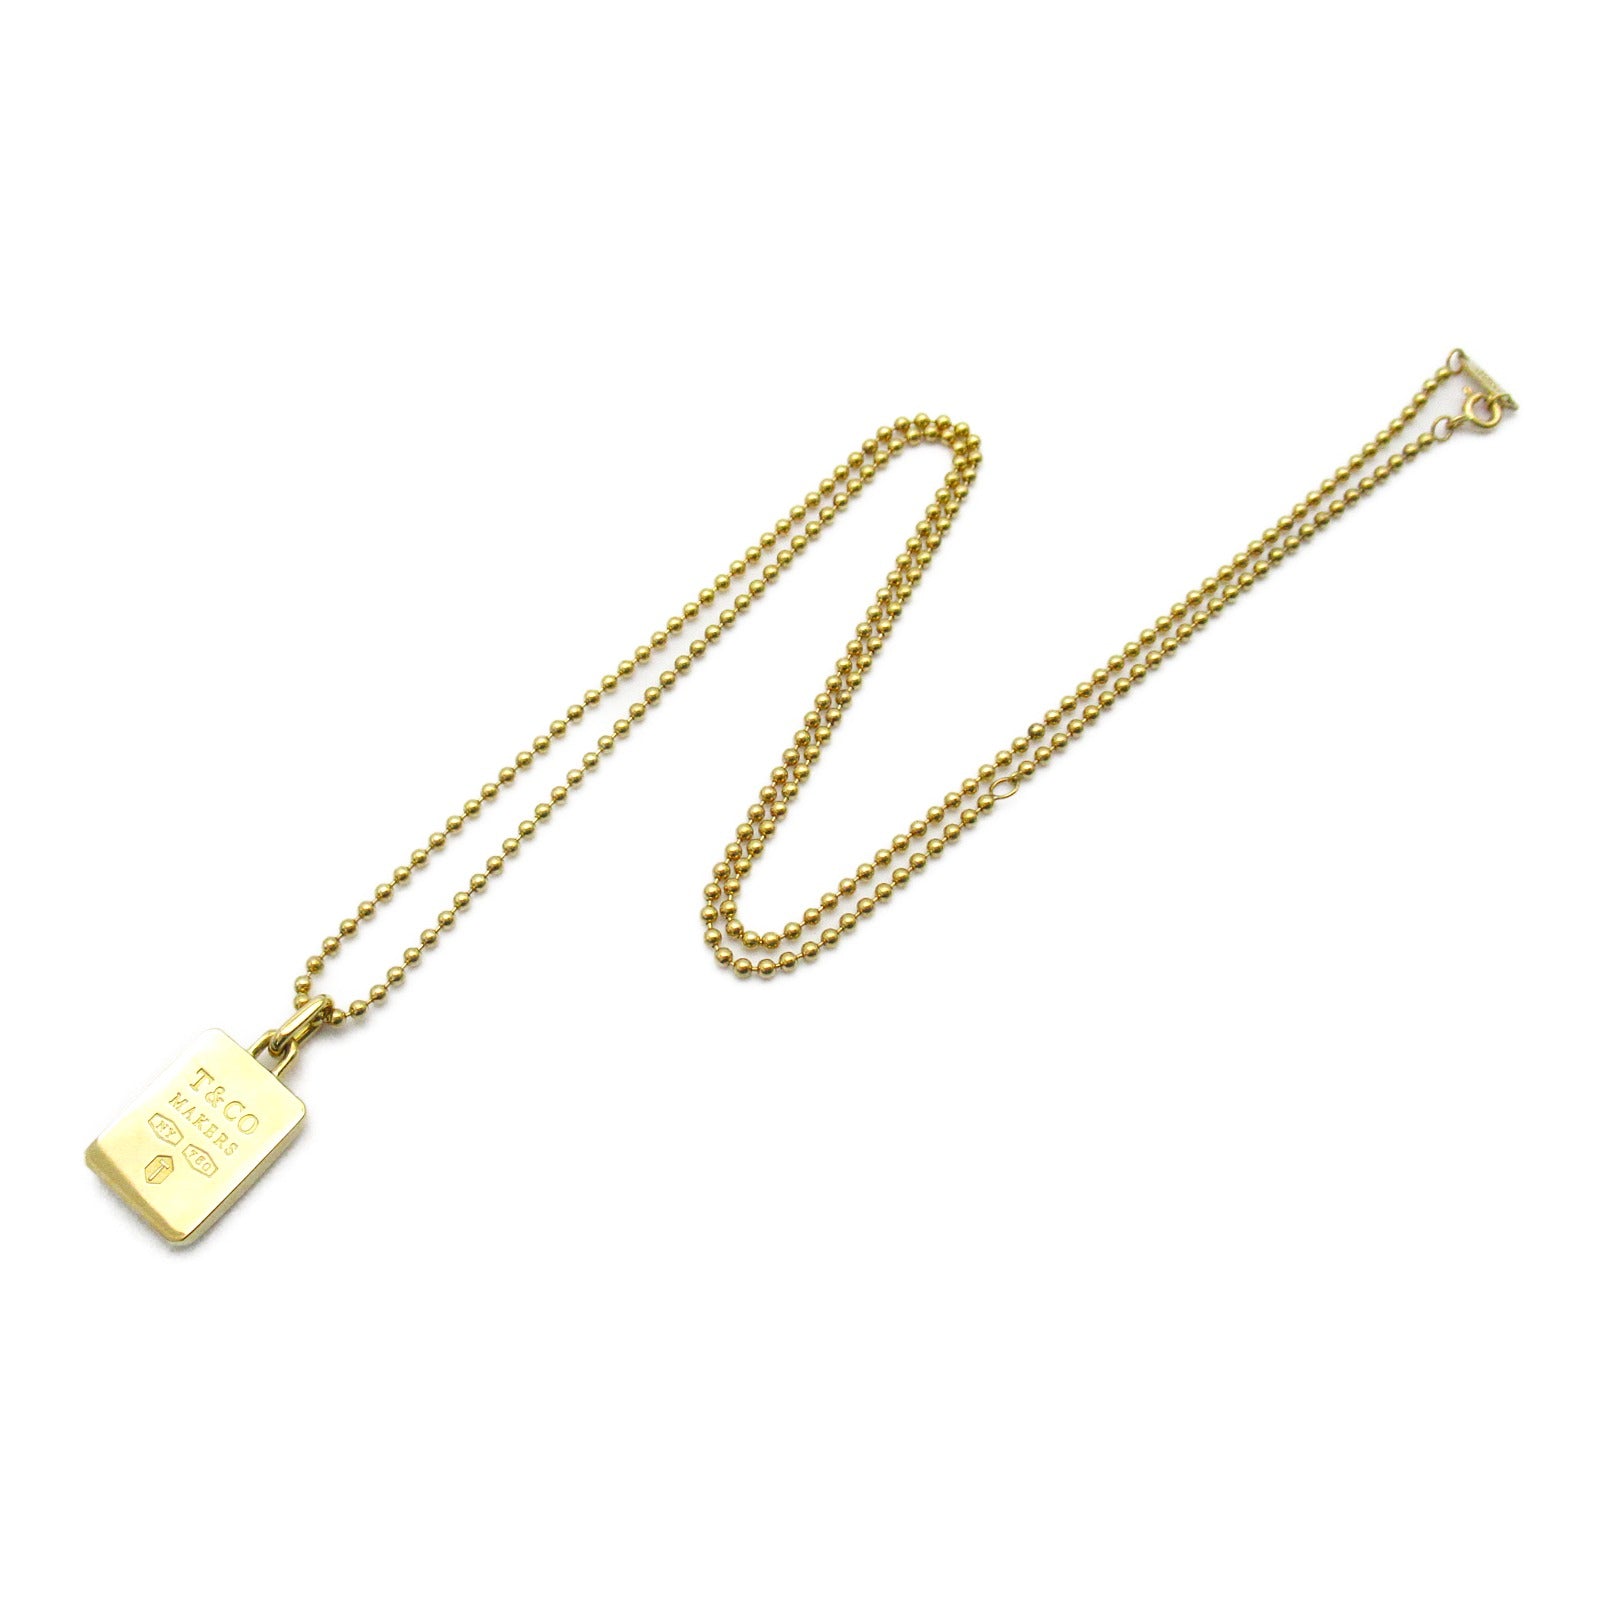 Tiffany TIFFANY&amp;CO manufacturers square necklace necklace jewelry K18 (yellow g) men ladies gold